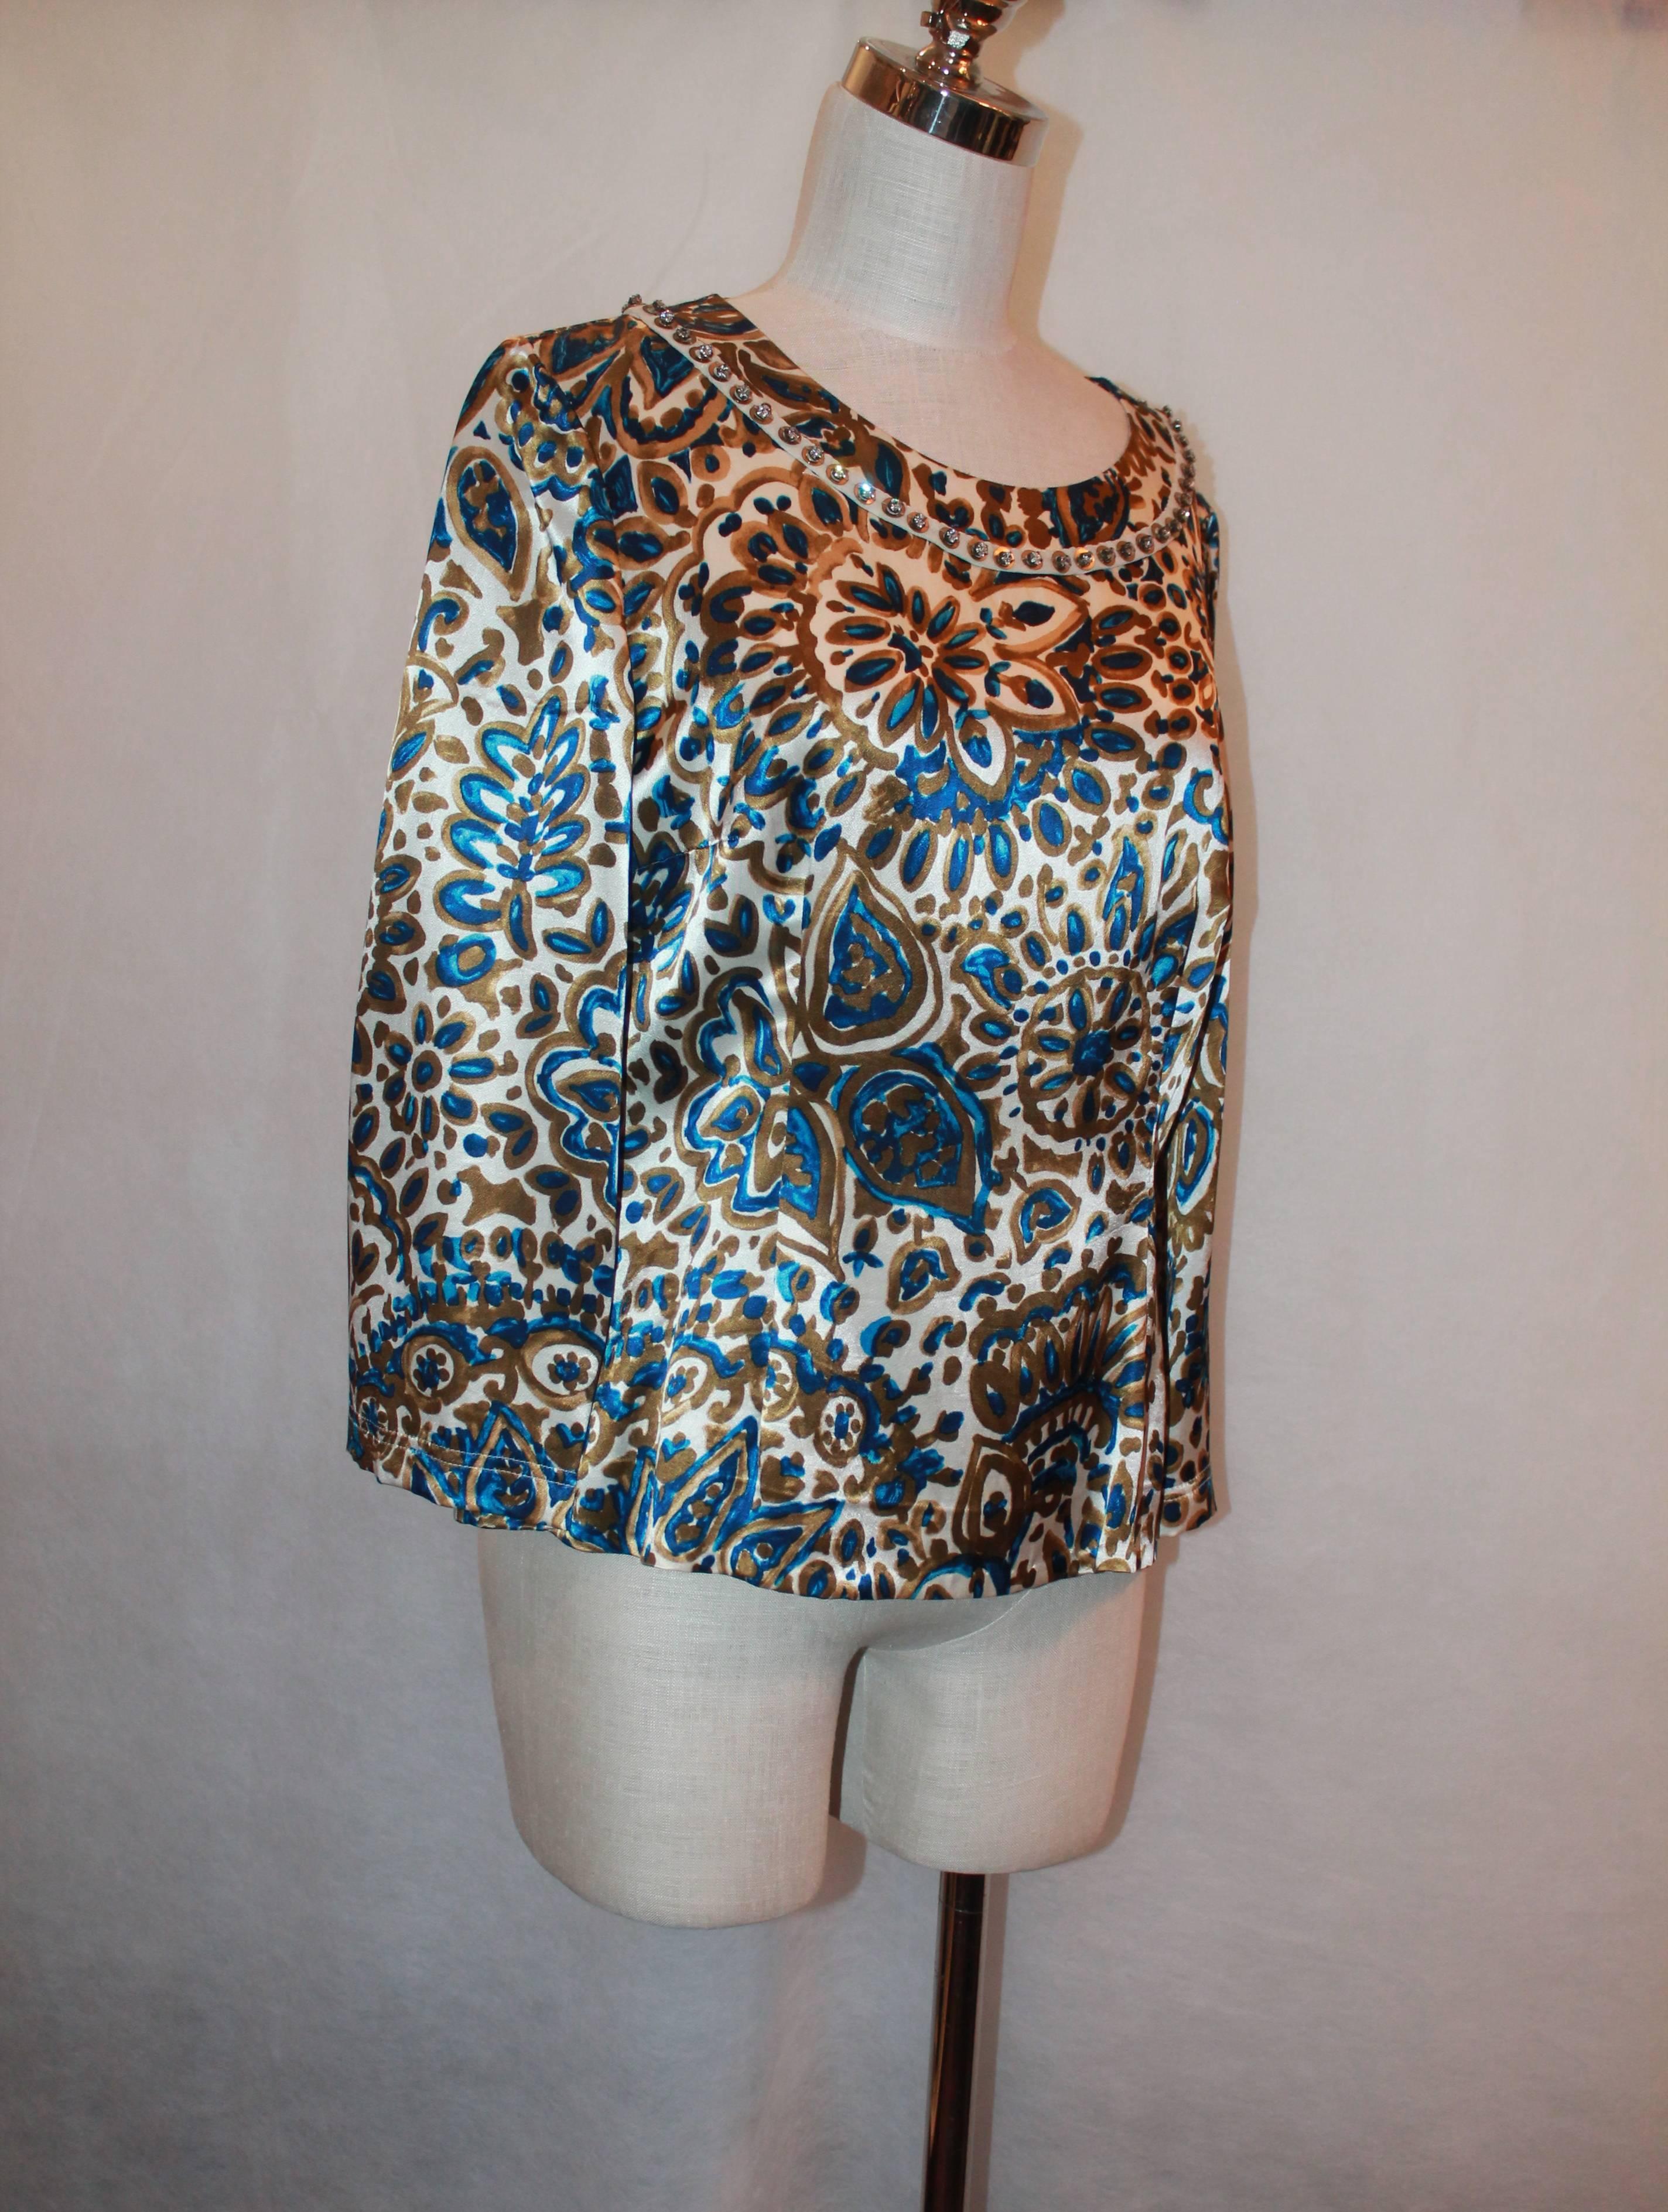 Chloe Ivory, Blue, & Gold Paisley Printed Silk Blouse w/ Rhinestone Trim - 42.  This blouse is in excellent condition with a rhinestone trim along the neckline.  This silk blouse features a beautiful ivory, blue, and gold paisley